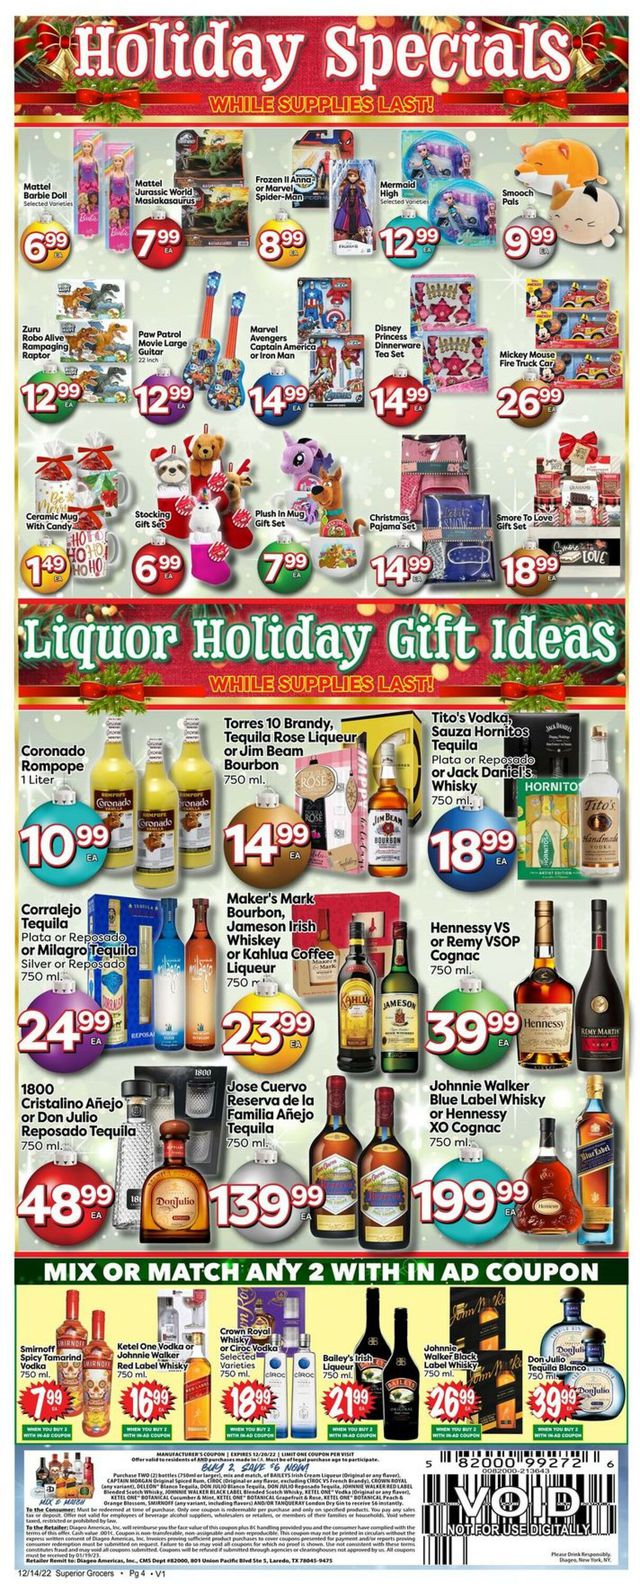 Superior Grocers Ad from 12/14/2022